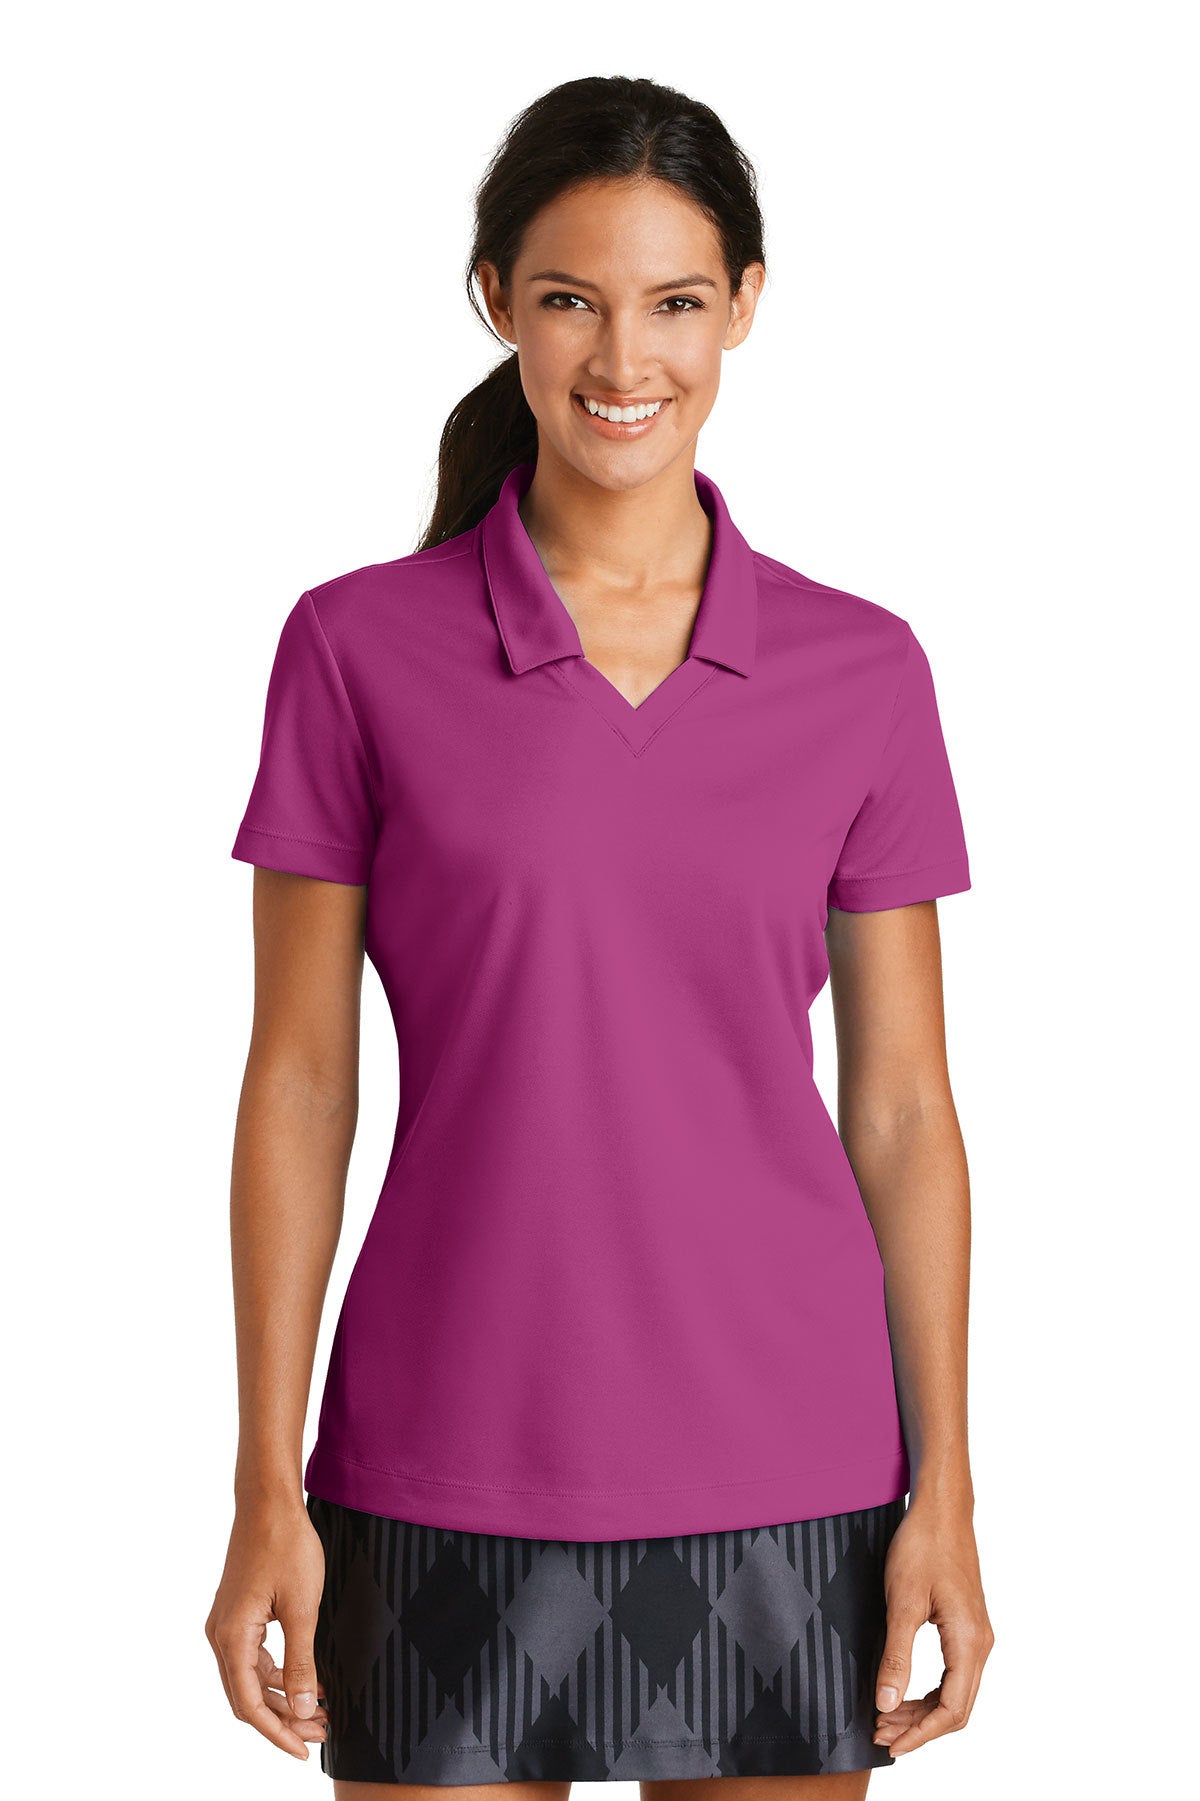 LL Sailboat (Embroidered) Nike Women's Golf Polo